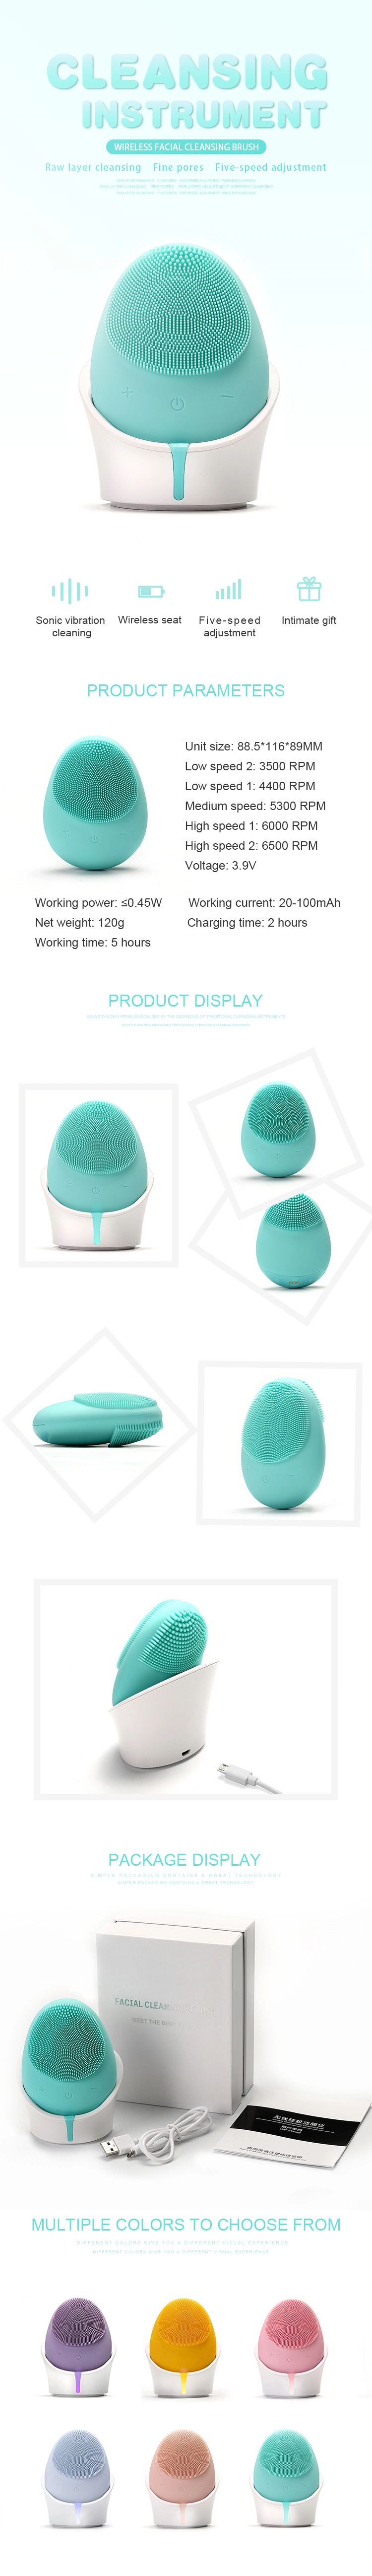 Beauty Cleansing Brush Best Cleansing Brush for Face Cheap Spin Brush